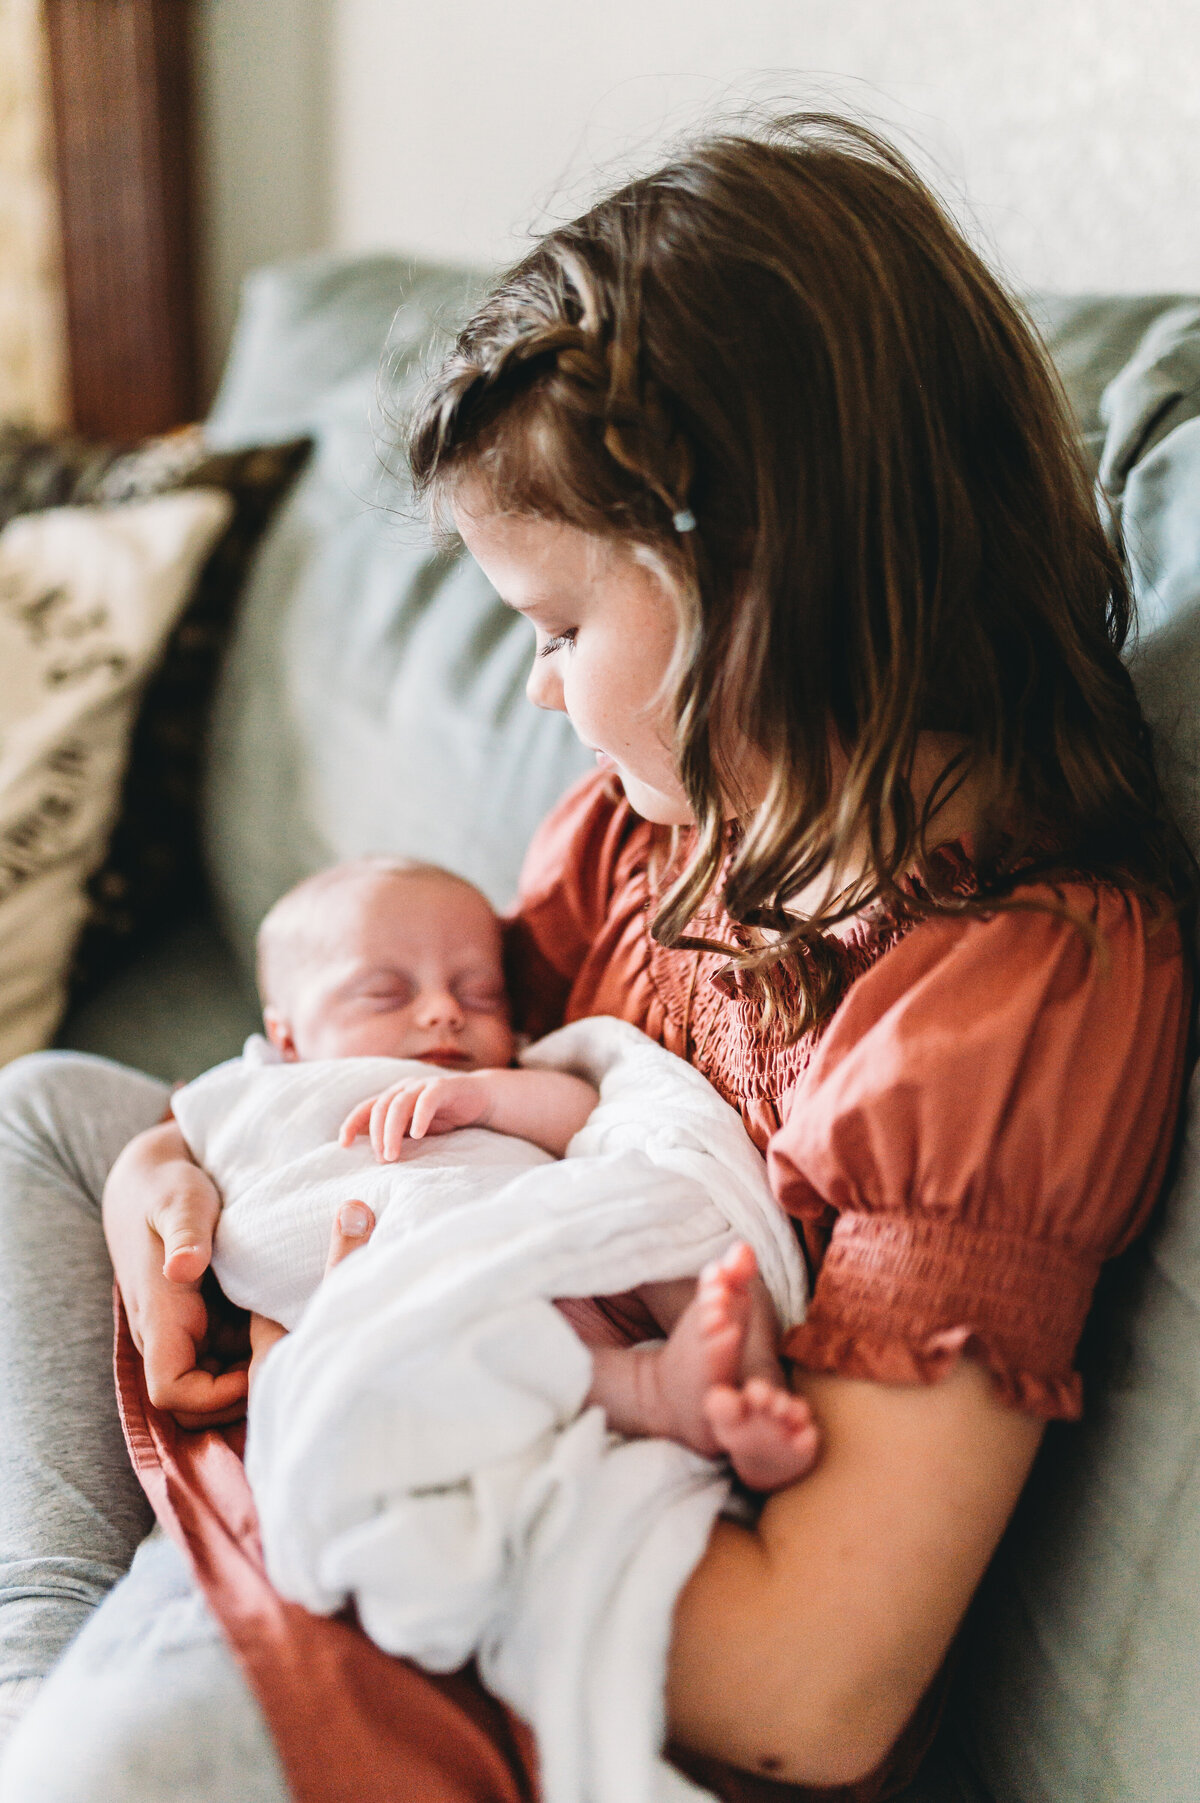 proud big sister holds new baby sister on couch at home